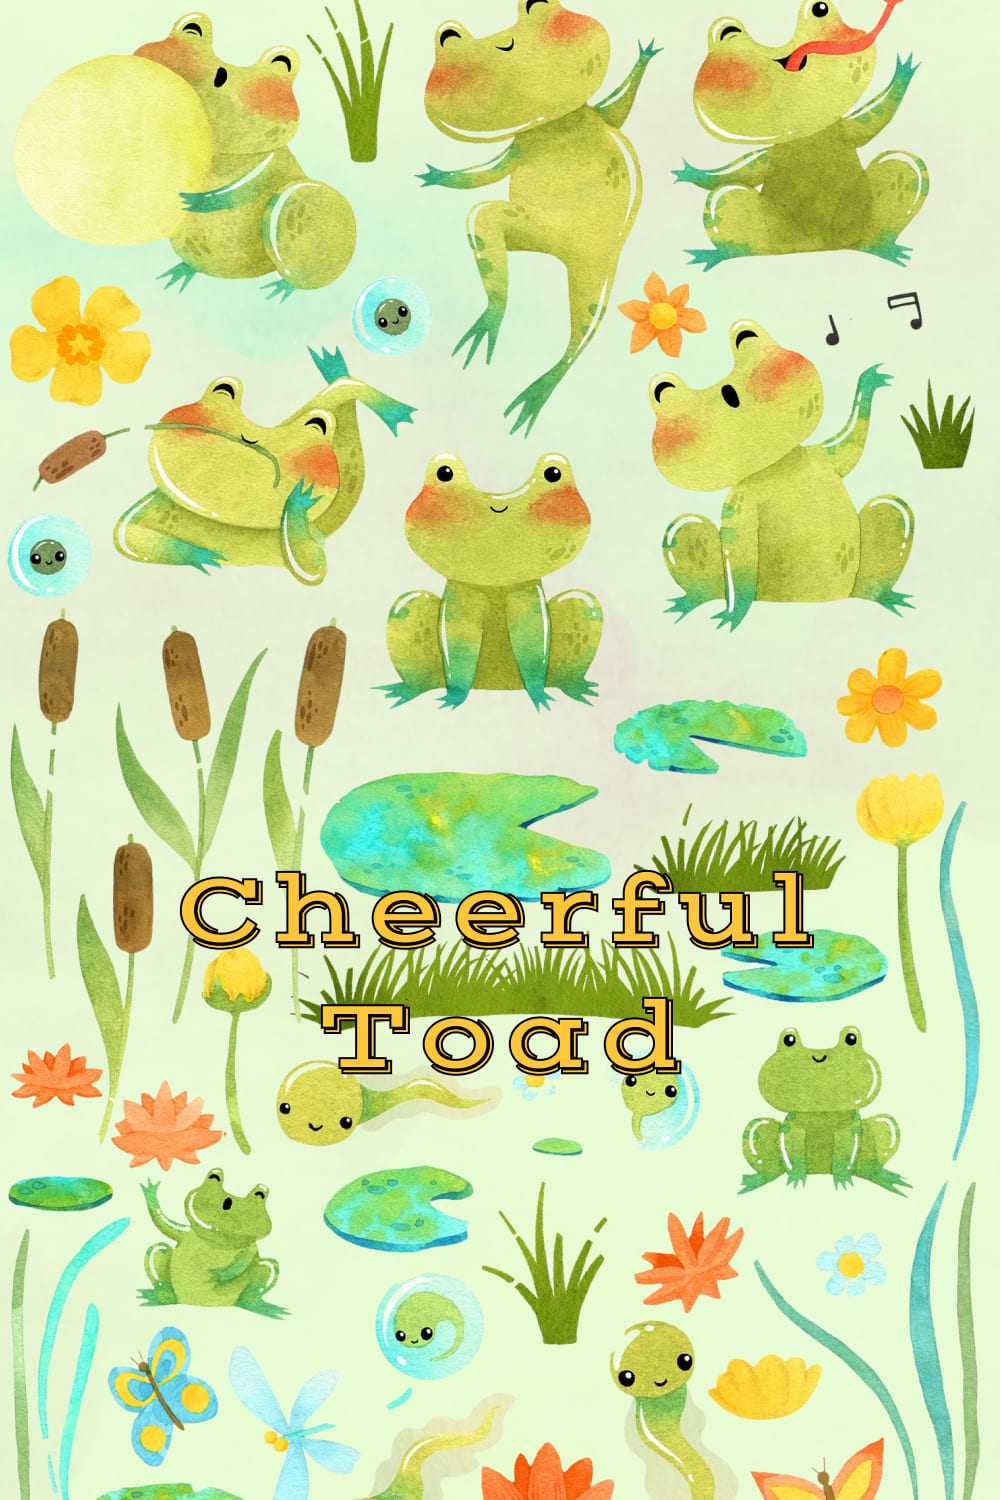 Cheerful Toad, Frog Сlipart - Pinterest Image Preview.